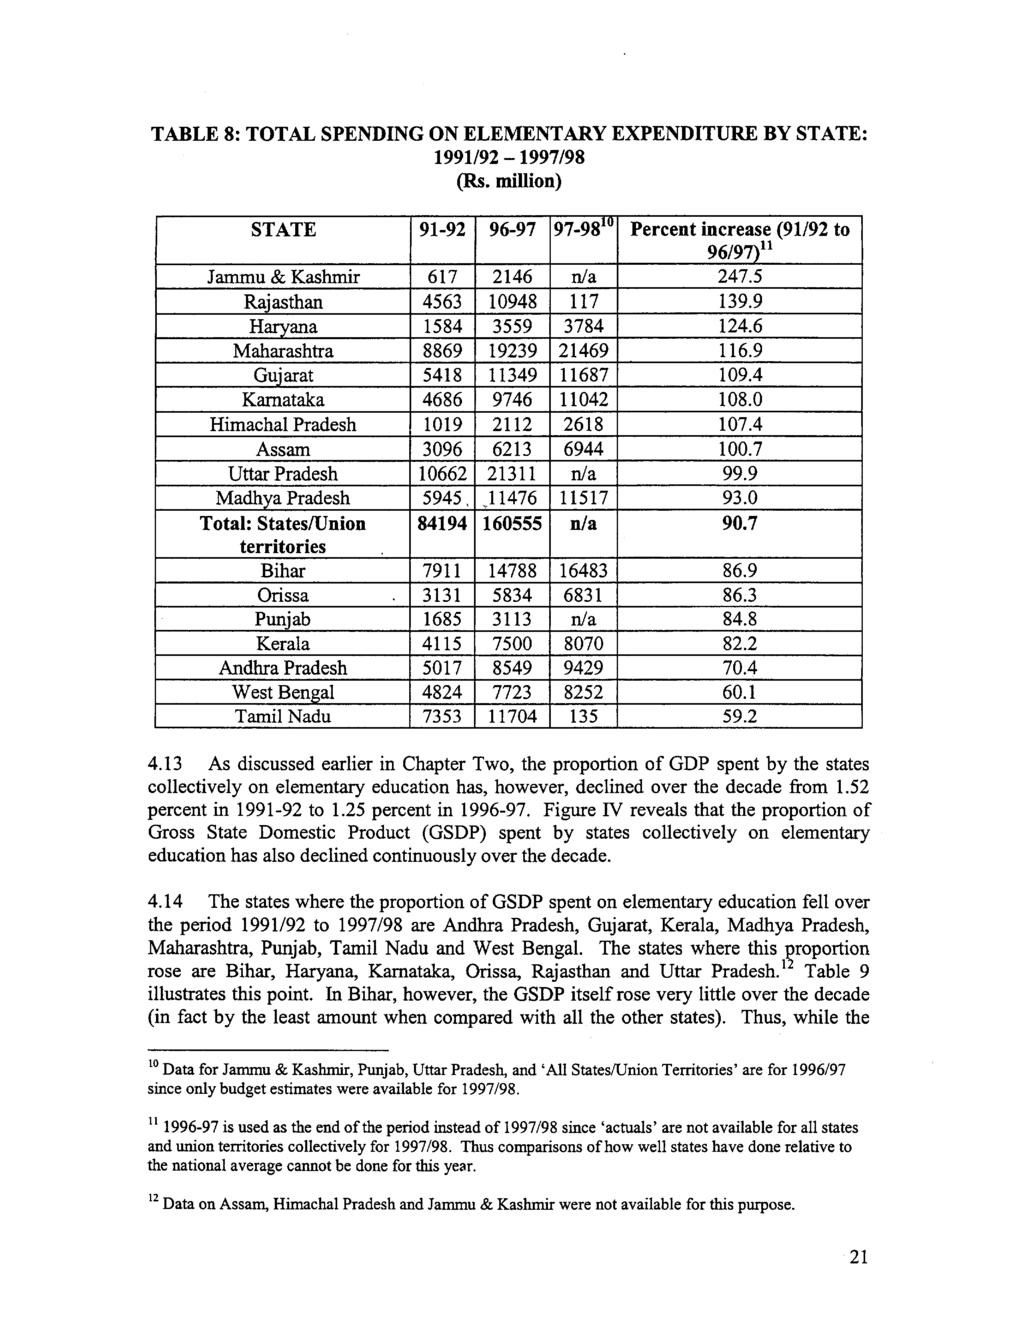 TABLE 8: TOTAL SPENDING ON ELEMENTARY EXPENDITURE BY STATE: 1991/92-1997/98 (Rs. million) STATE 91-92 96-97 97-9810 Percent increase (91/92 to 96/97)1 Jammu & Kashmir 617 2146 n/a 247.